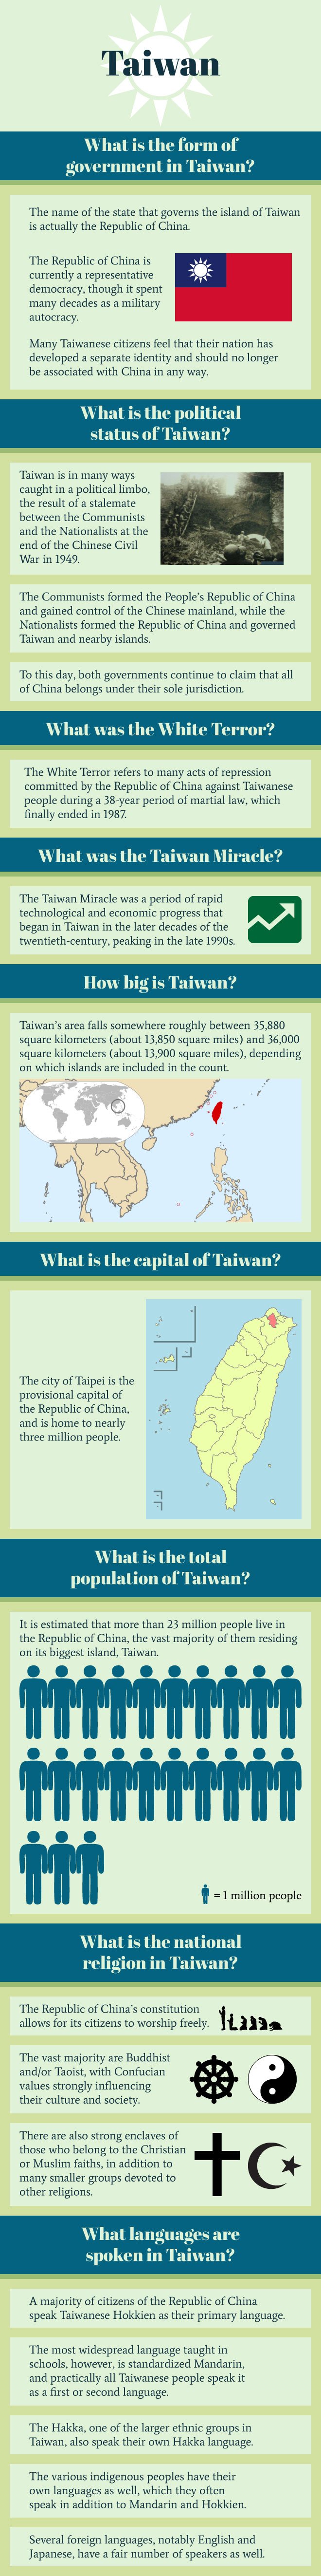 Infographic of Taiwan Facts